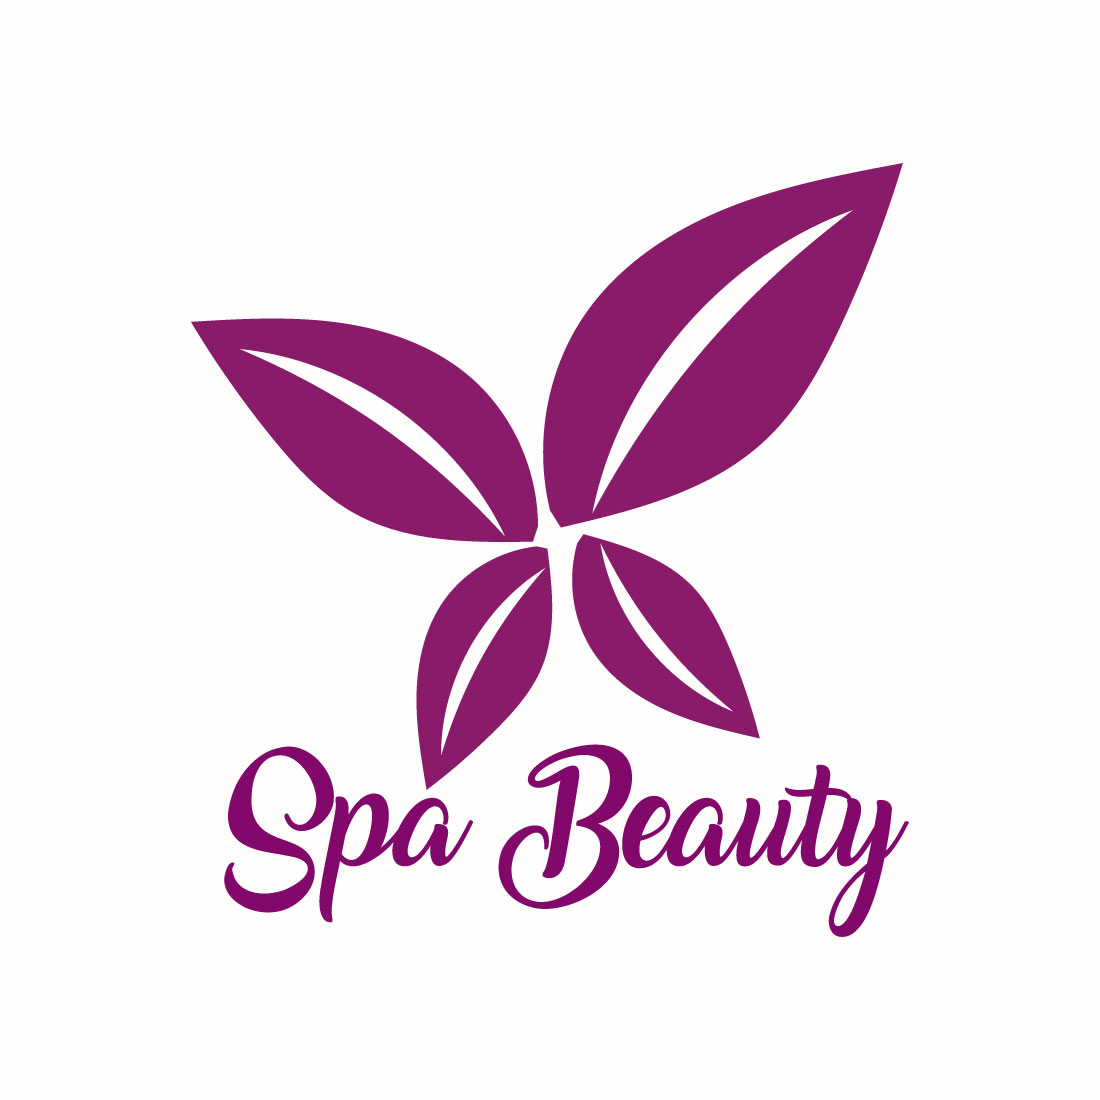 Free Healthy skin care logo cover image.